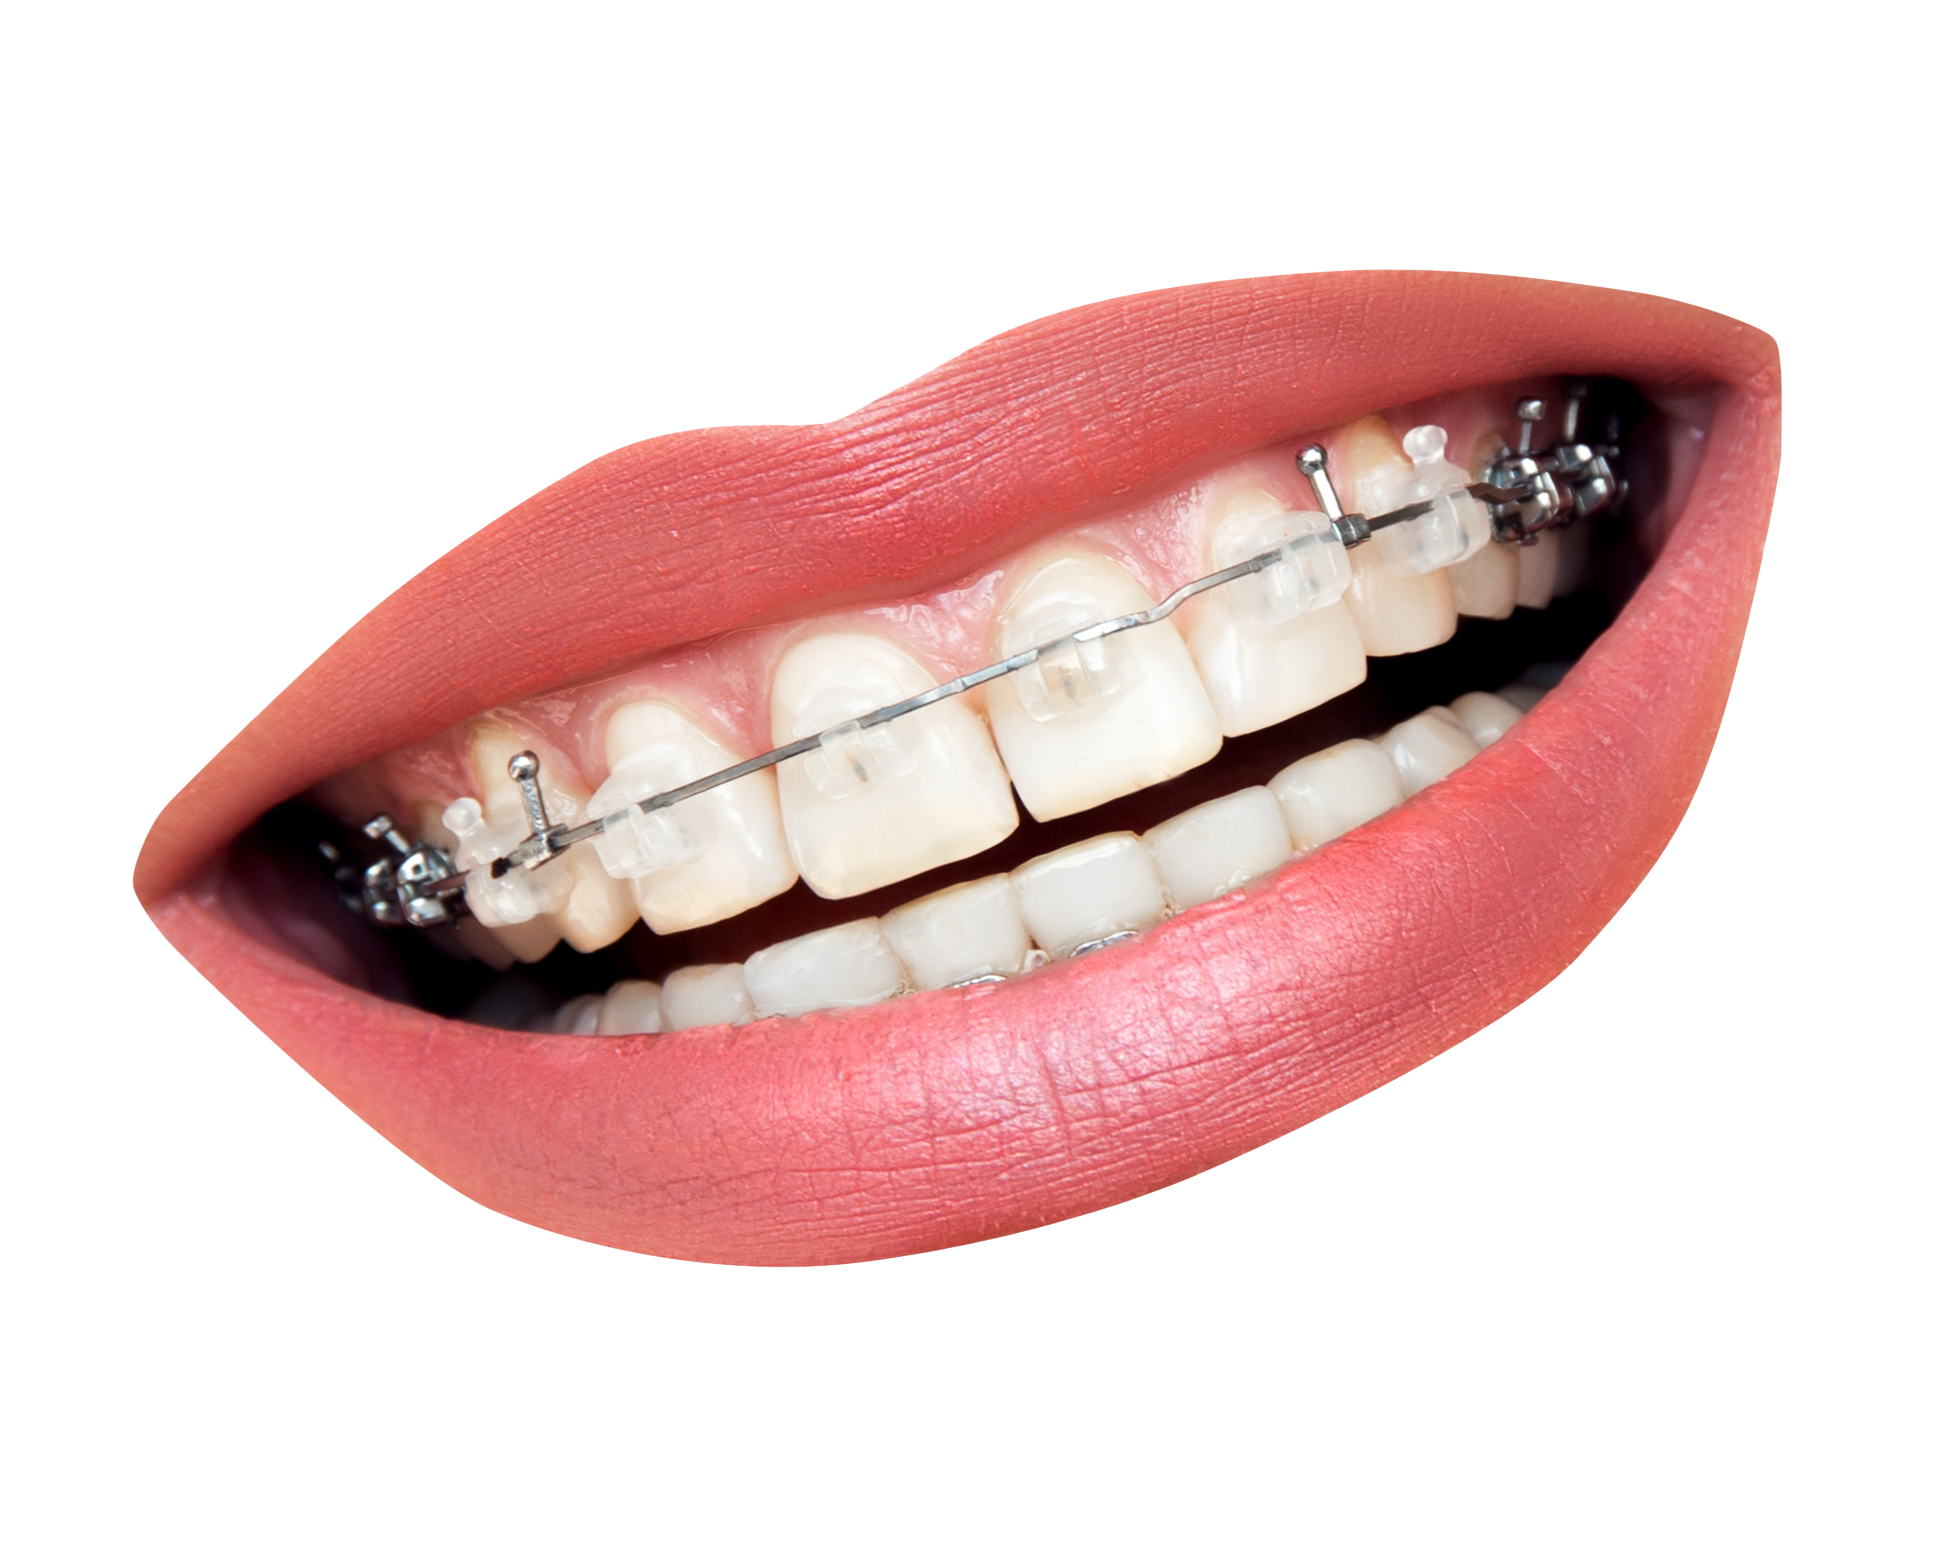 Mouth Smile PNG Image